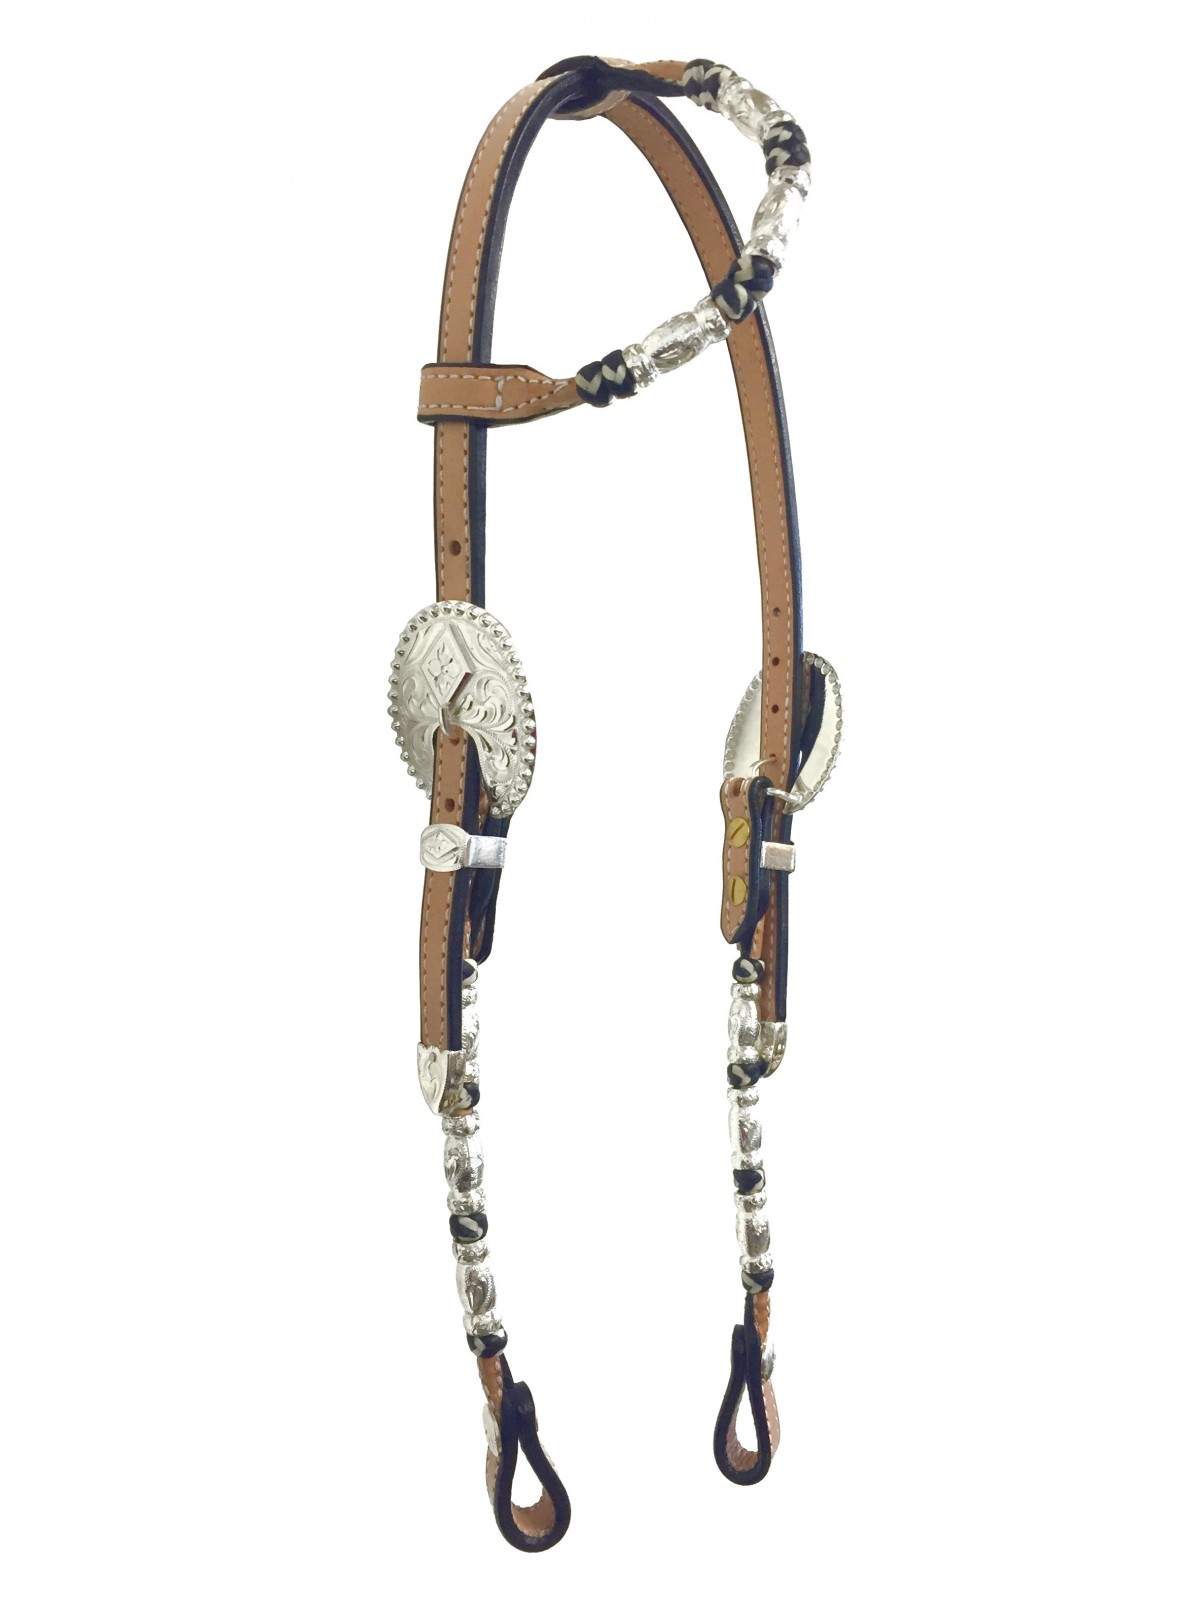 Dale Chavez Show One-Ear Headstall 1870